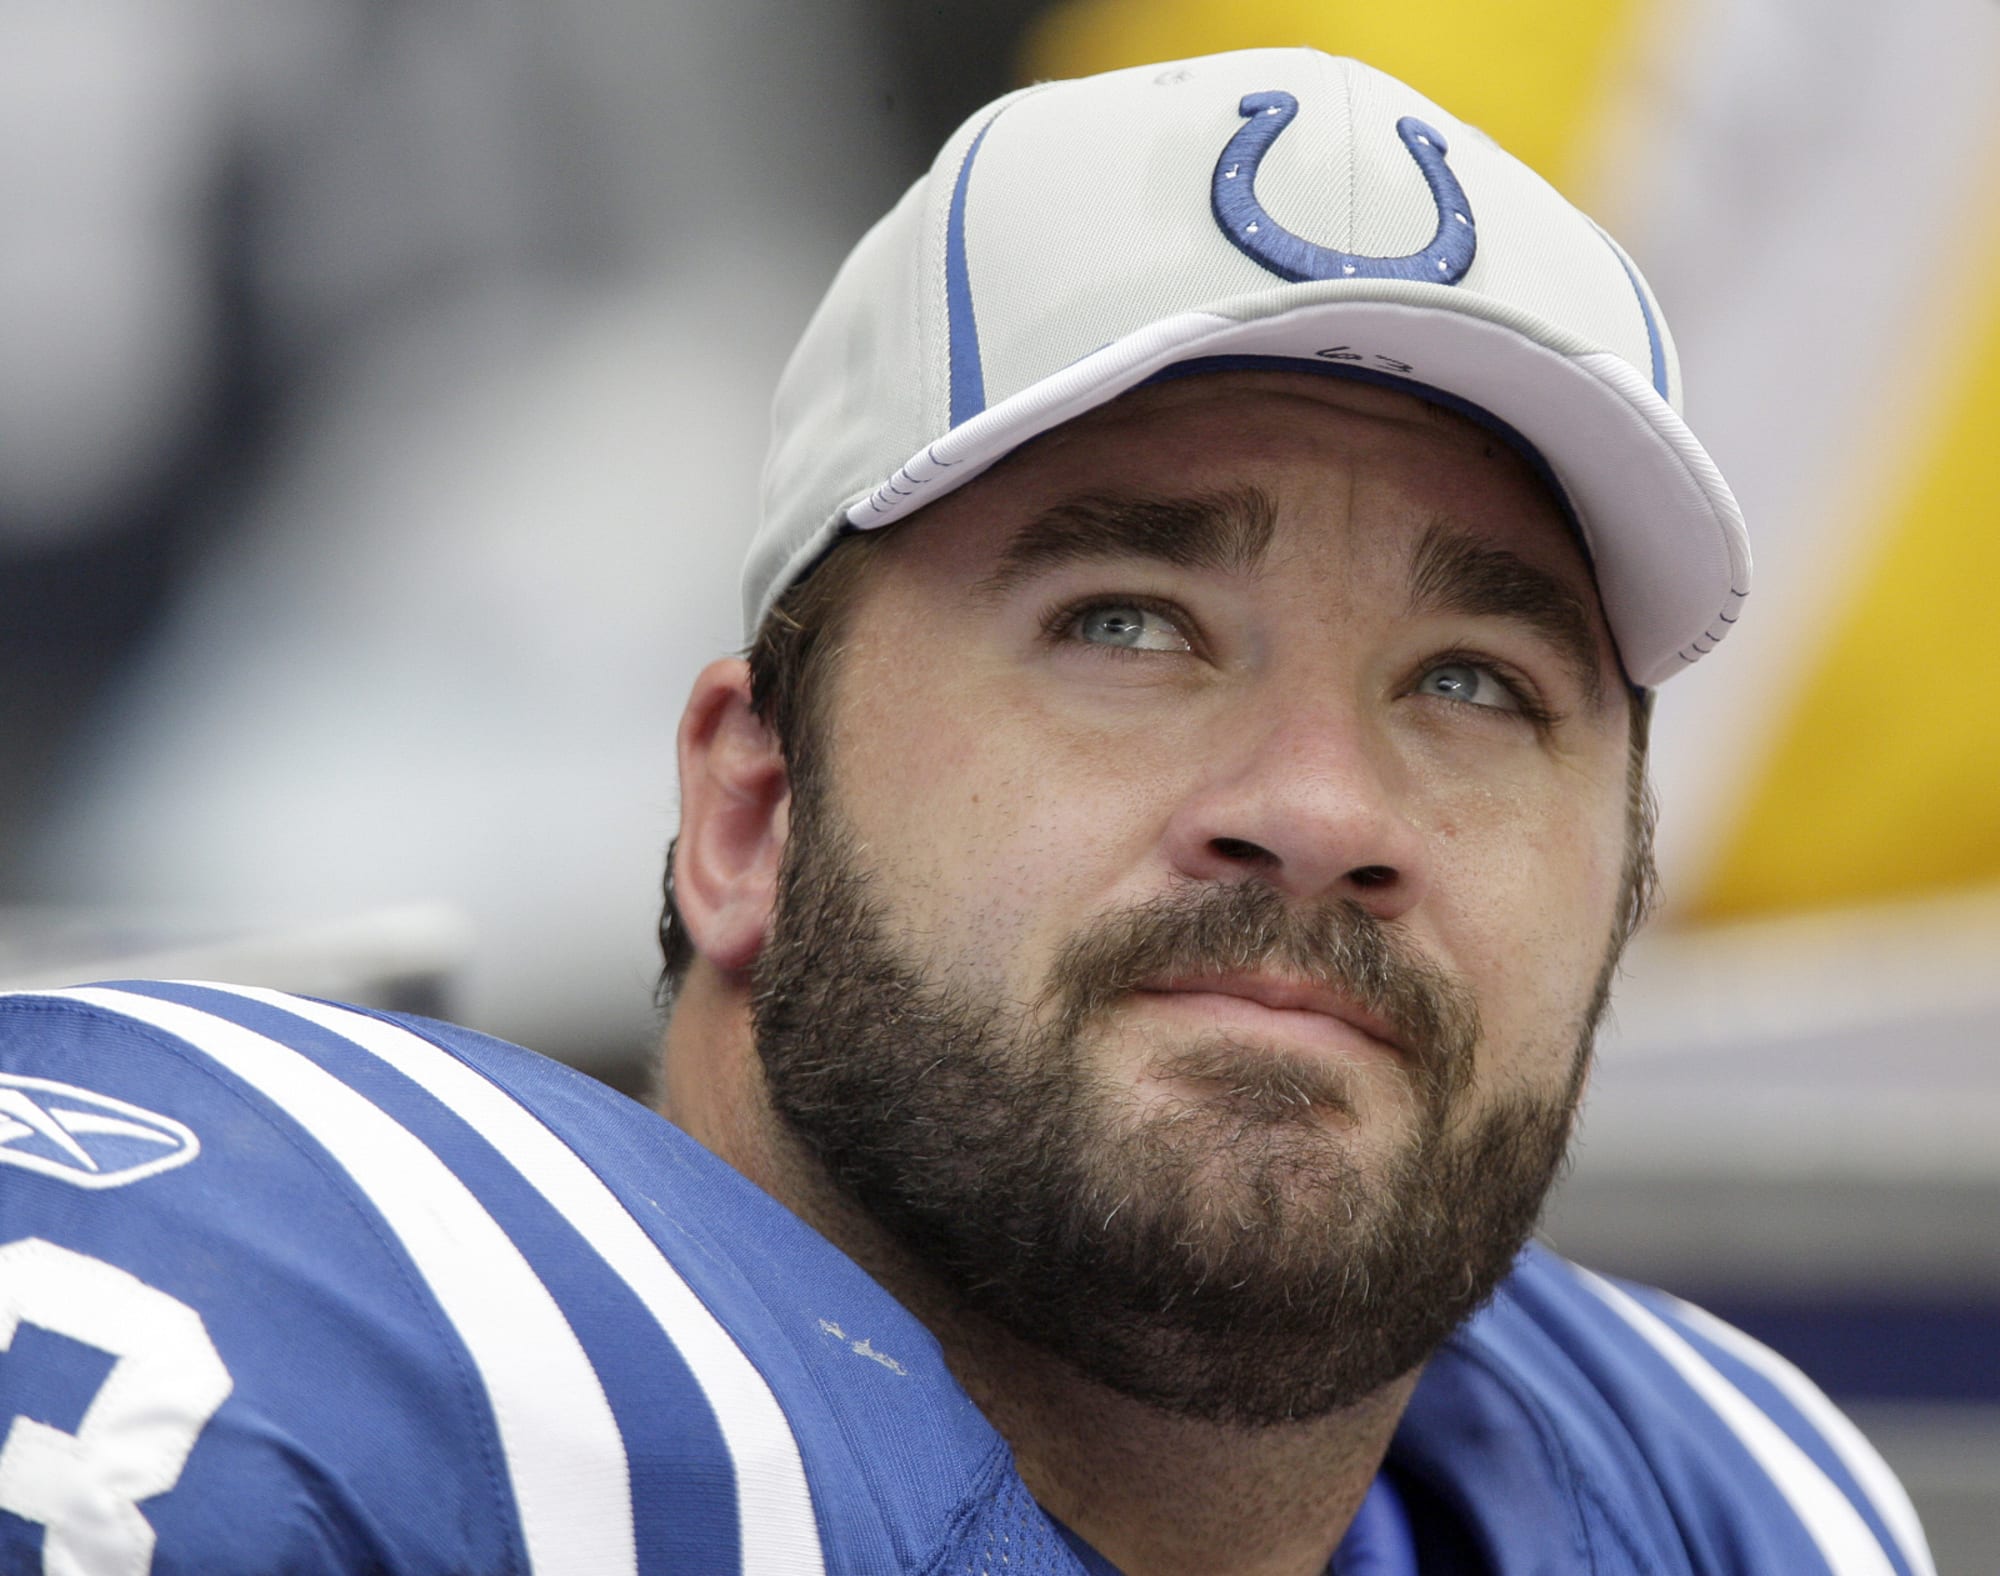 Colts hiring Jeff Saturday over more qualified Black NFL coaches is a bad look for Indianapolis